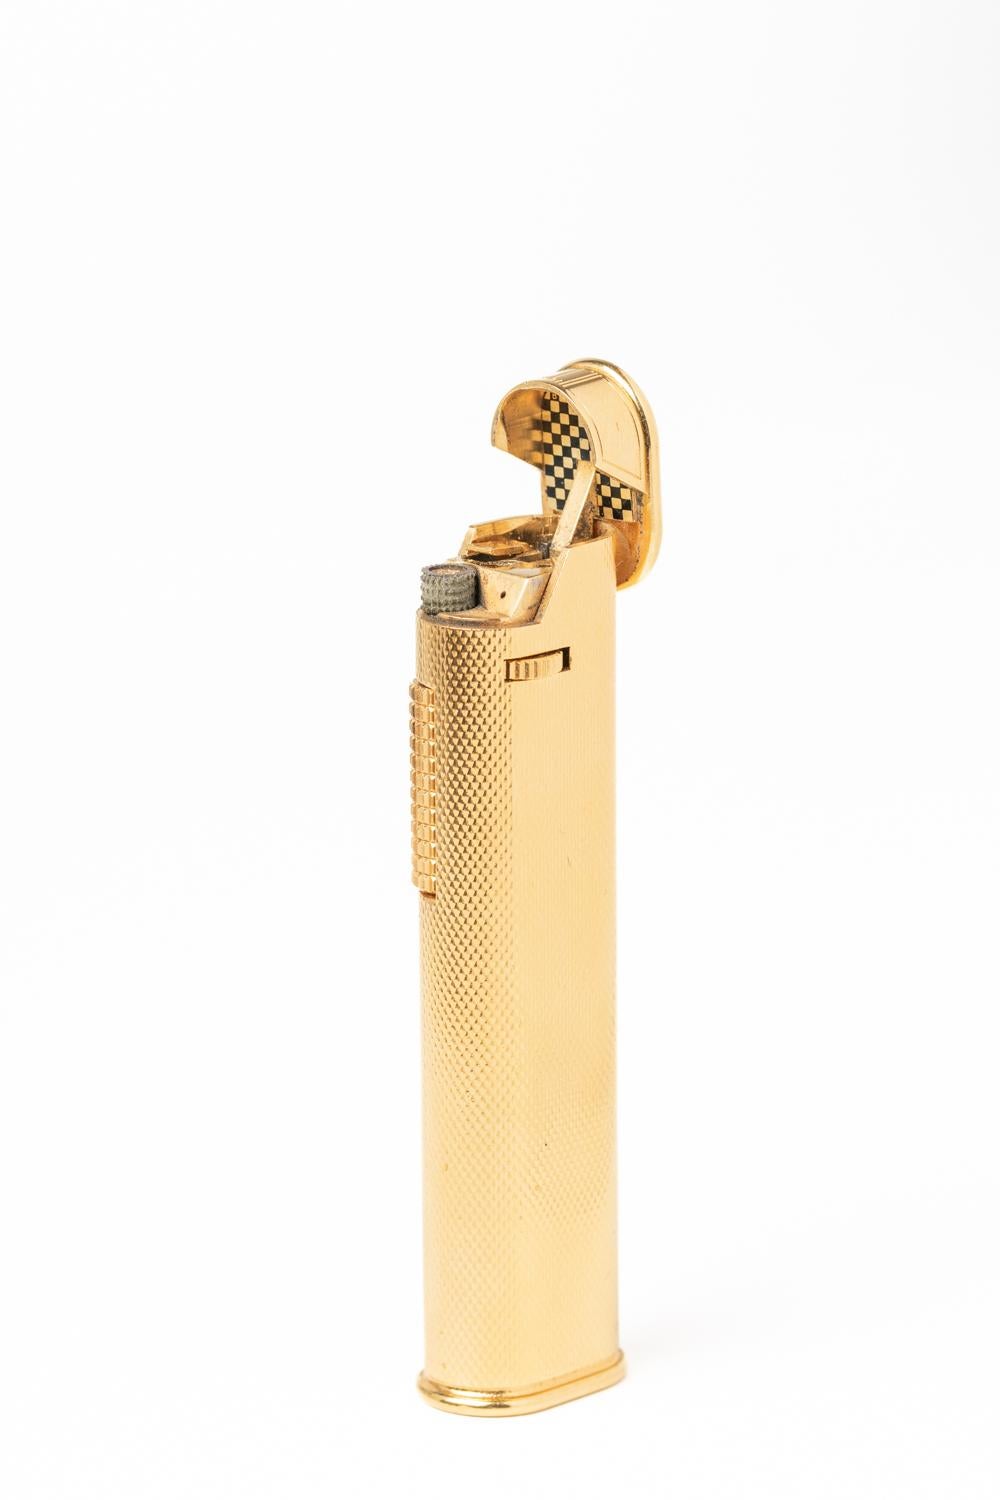 Vintage Dunhill Gold Plated Slim Lighter In Excellent Condition For Sale In Portland, England